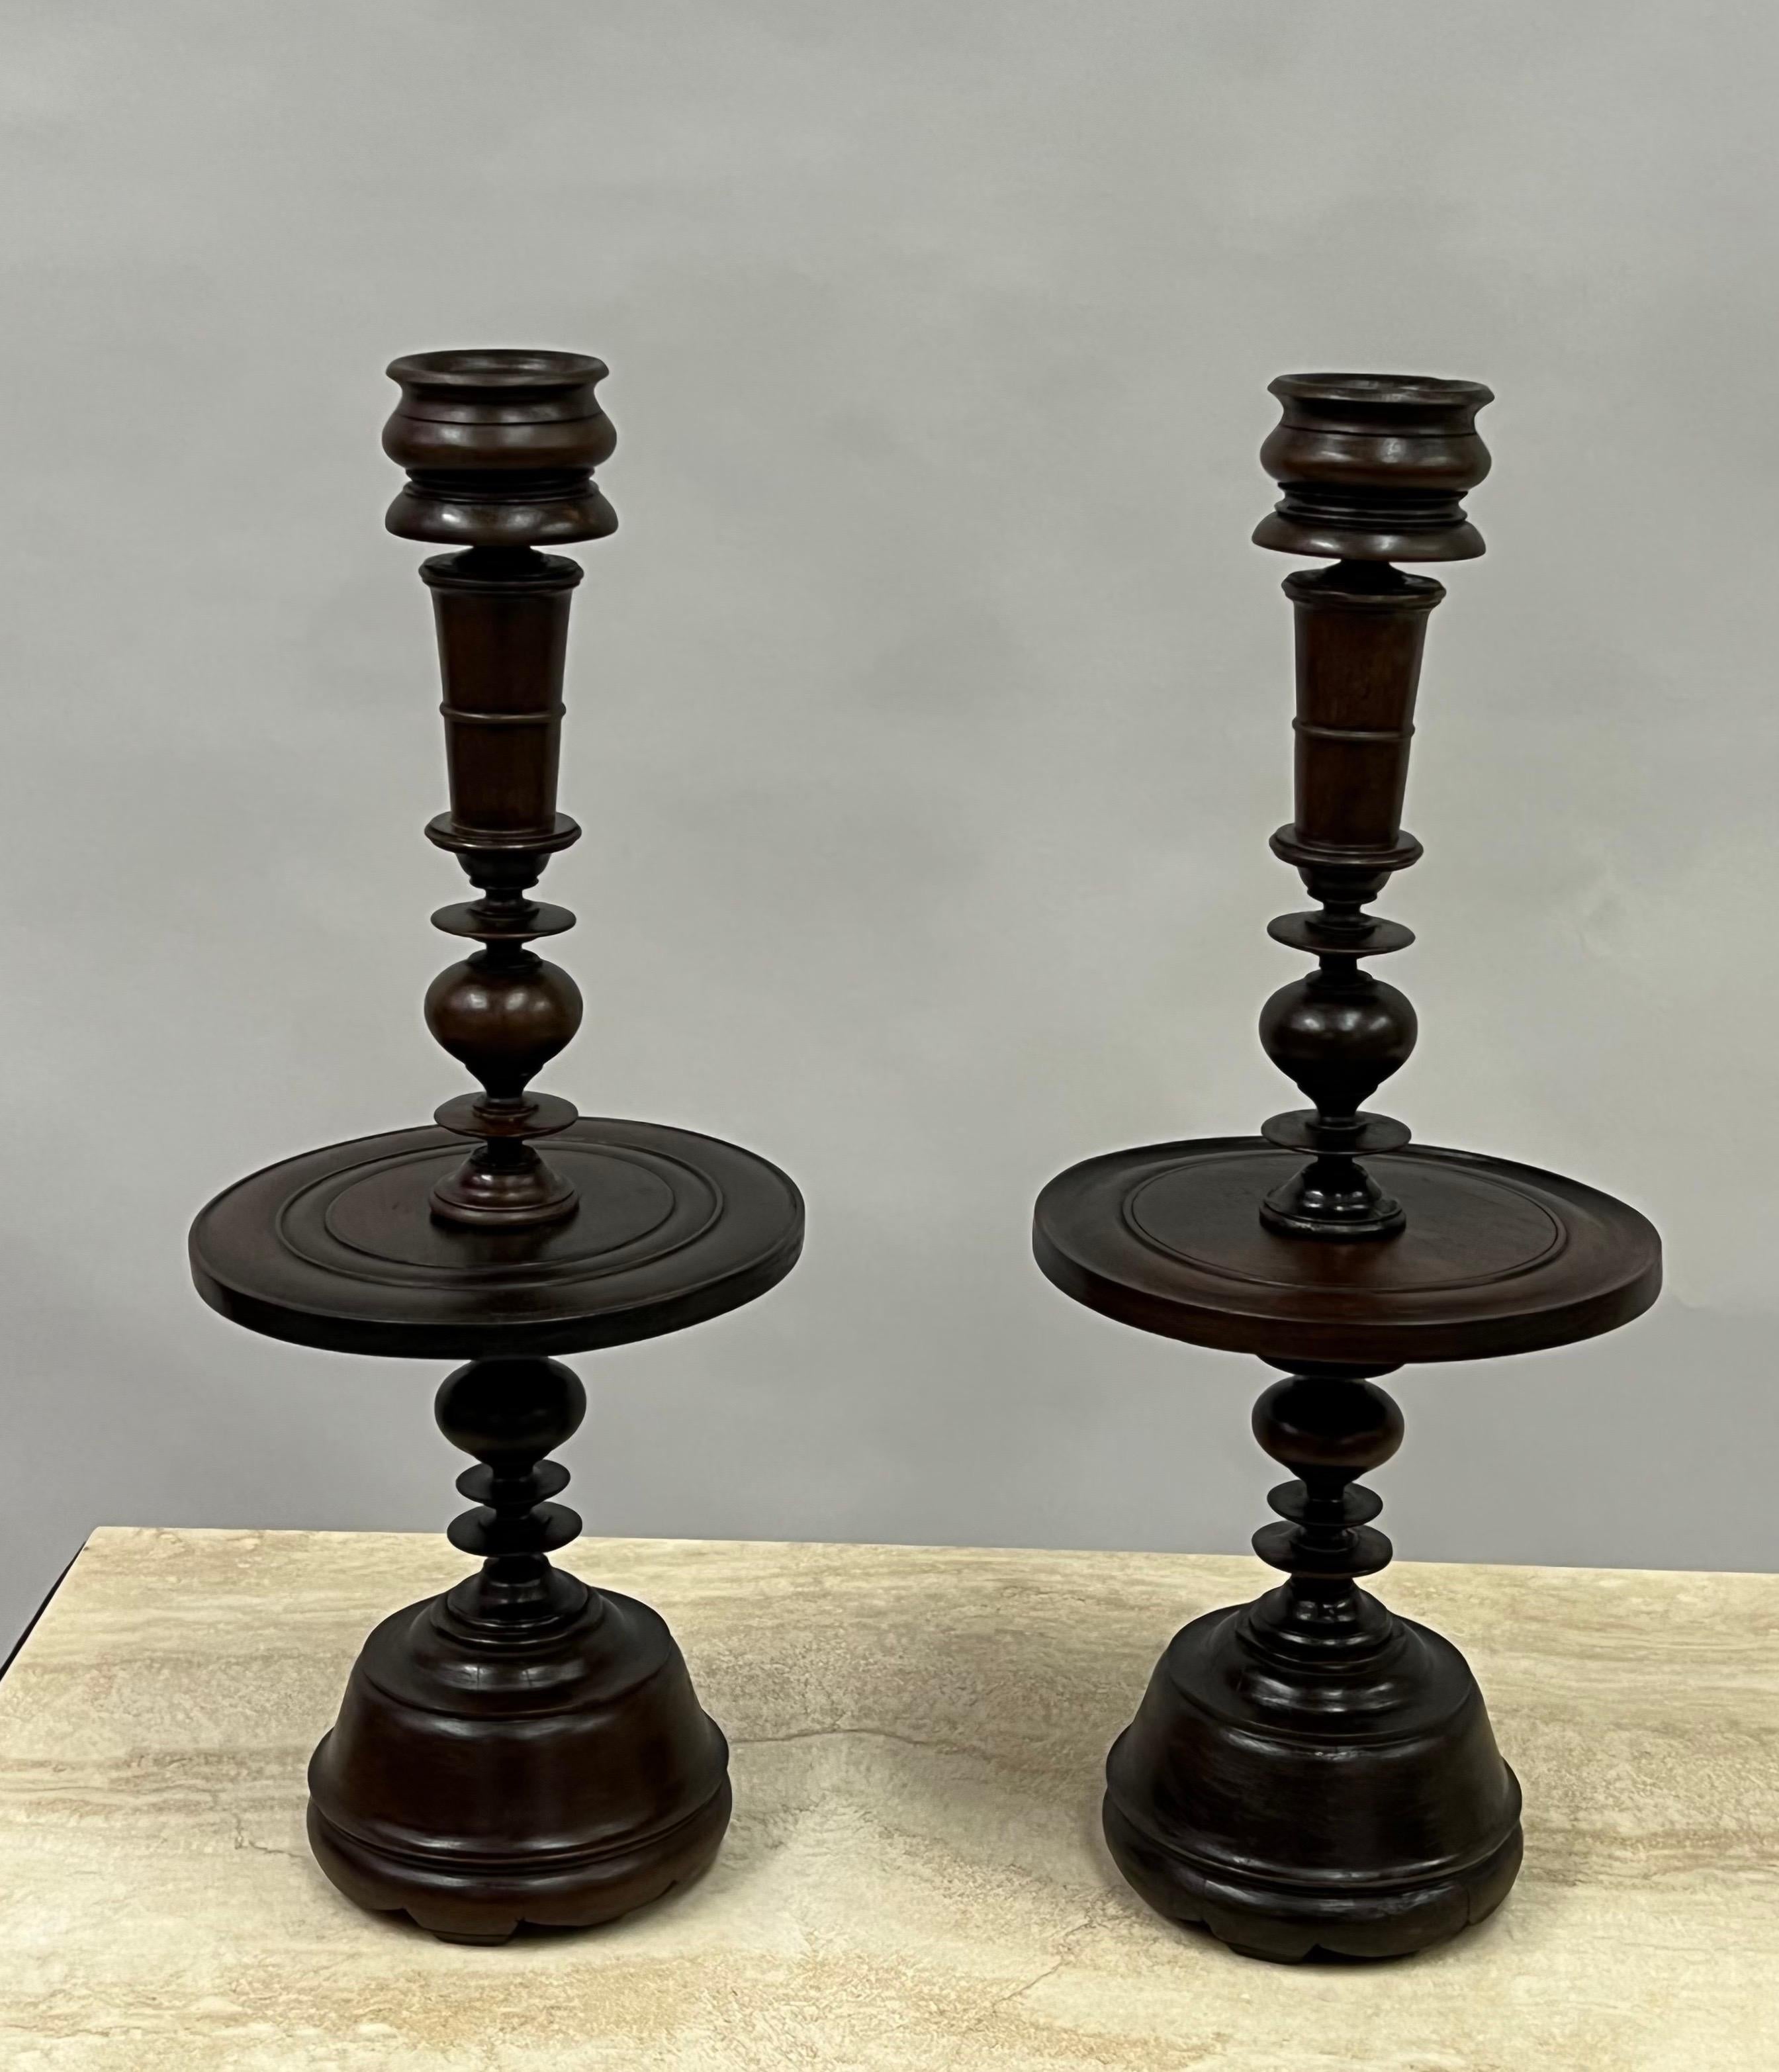 carved wooden table lamps